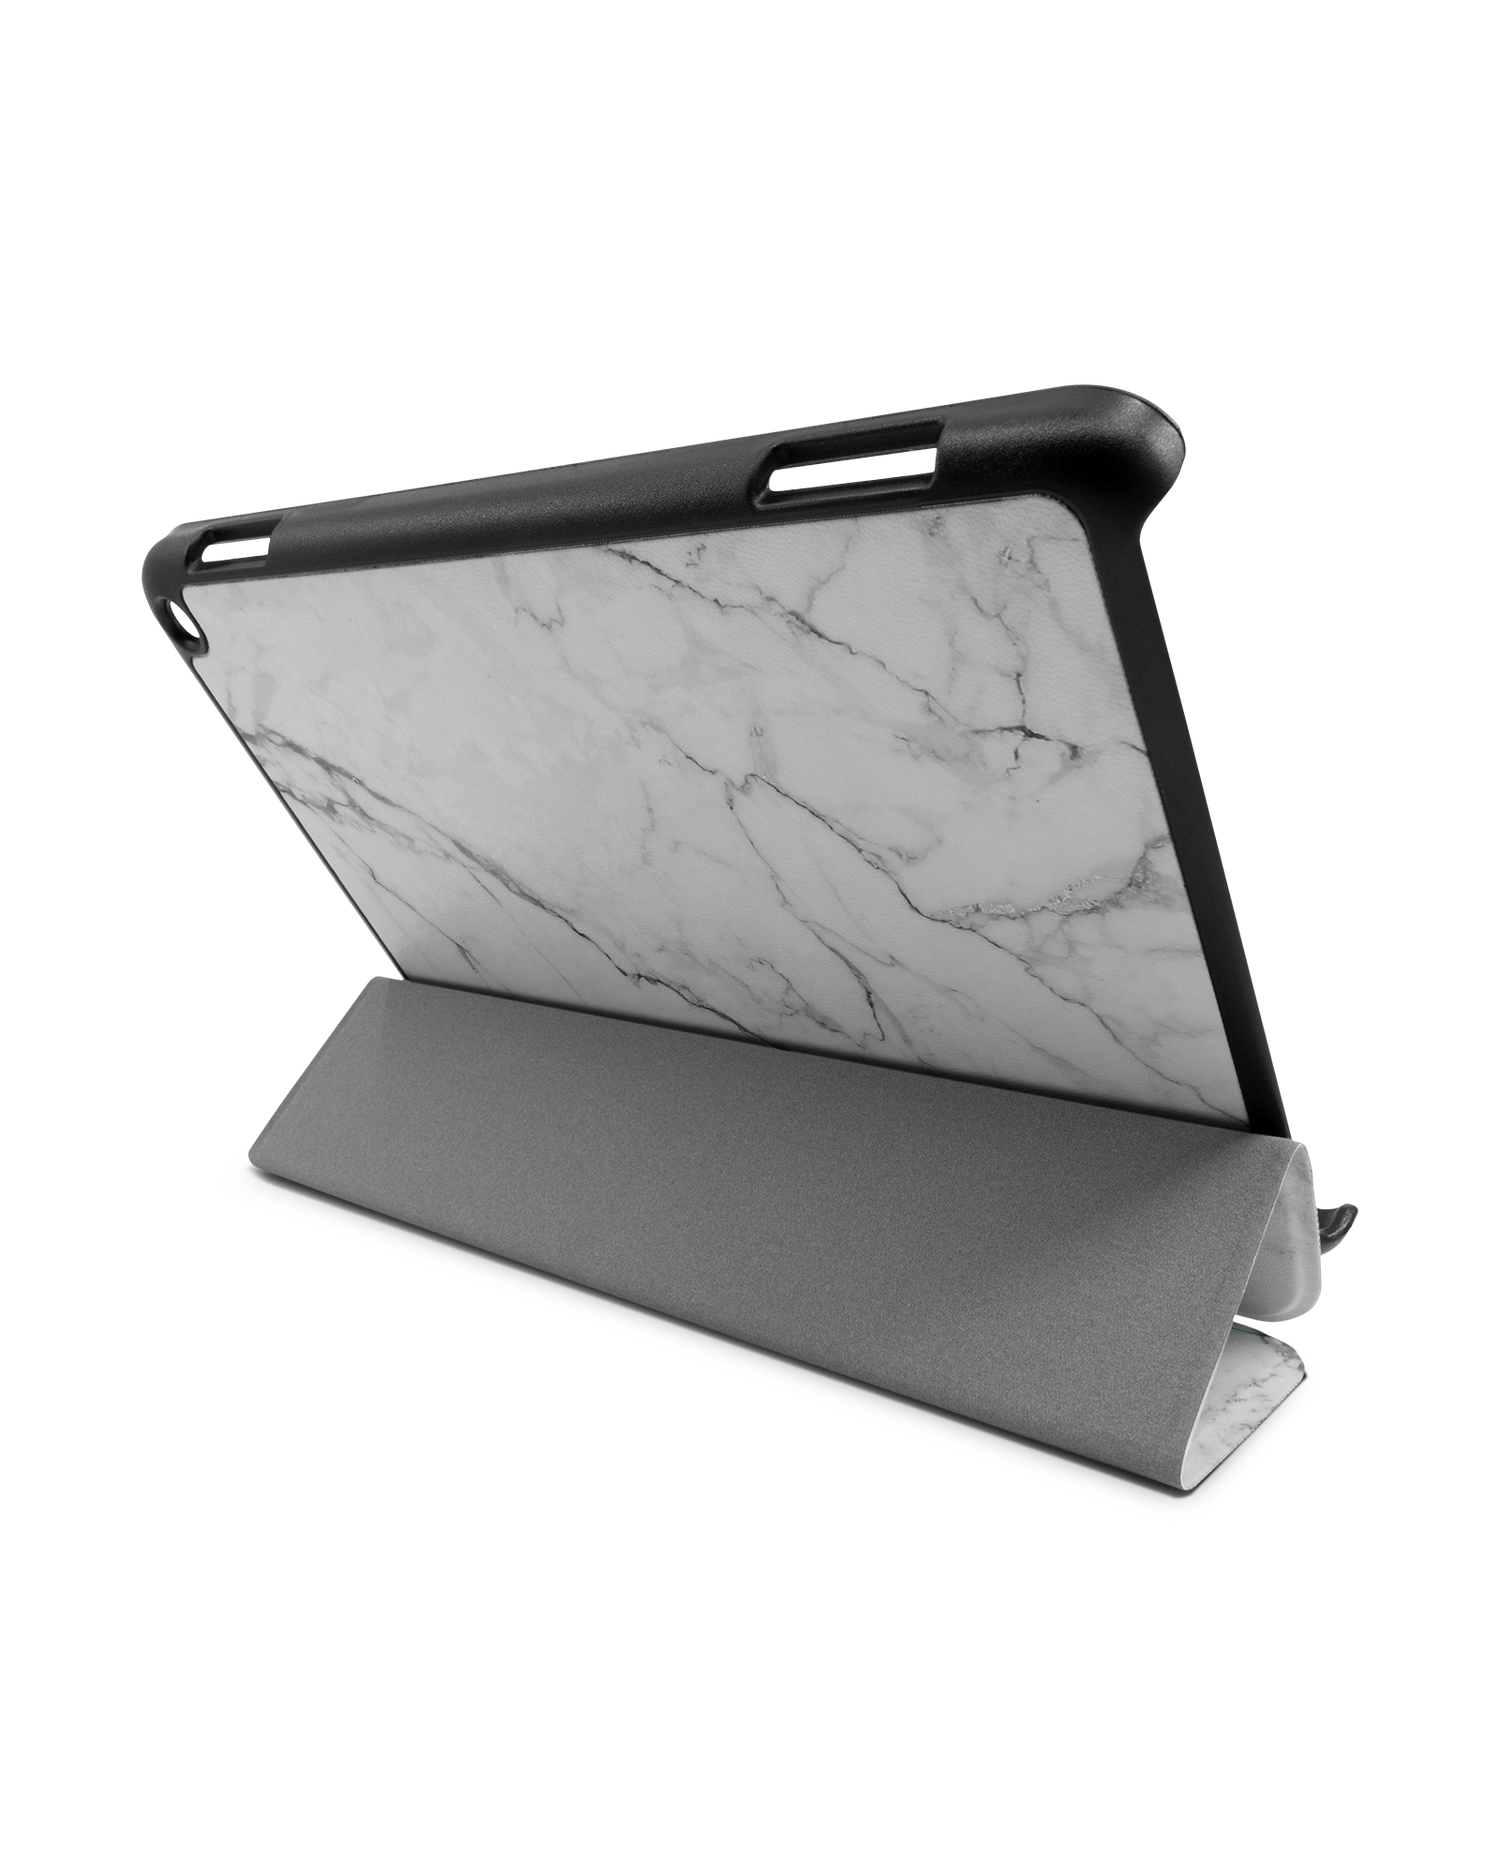 White Marble Tablet Smart Case for Amazon Fire HD 8 (2022), Amazon Fire HD 8 Plus (2022), Amazon Fire HD 8 (2020), Amazon Fire HD 8 Plus (2020): Used as Stand